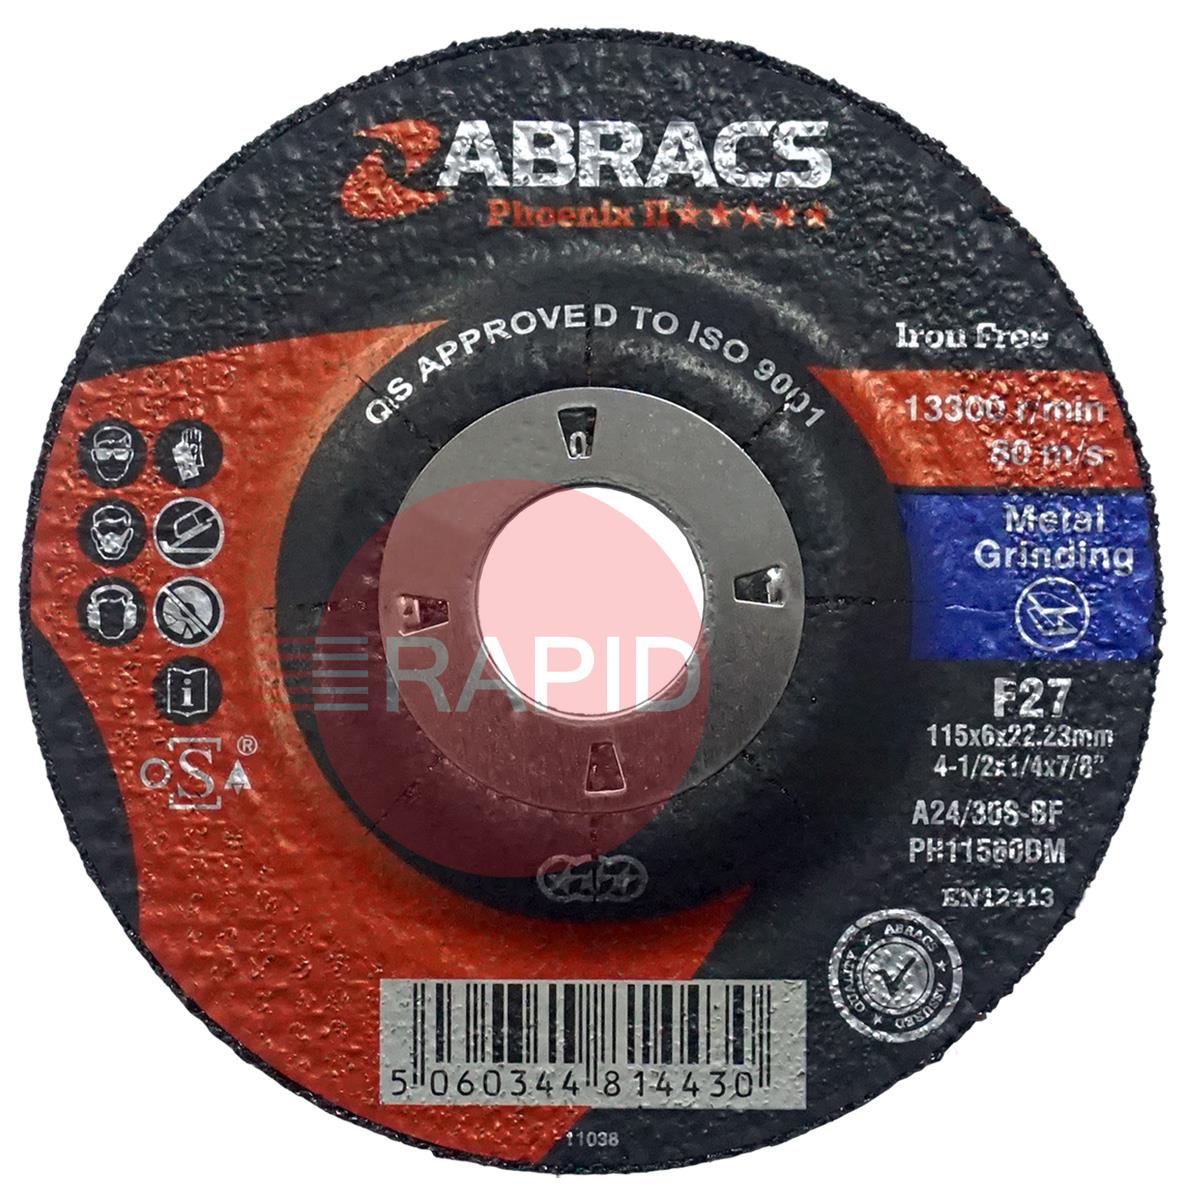 PH11560DM  Abracs Phoenix II 115mm (4.5) Depressed Centre Grinding Disc 6mm Thick. Grade A24/30S4BF For Steel.